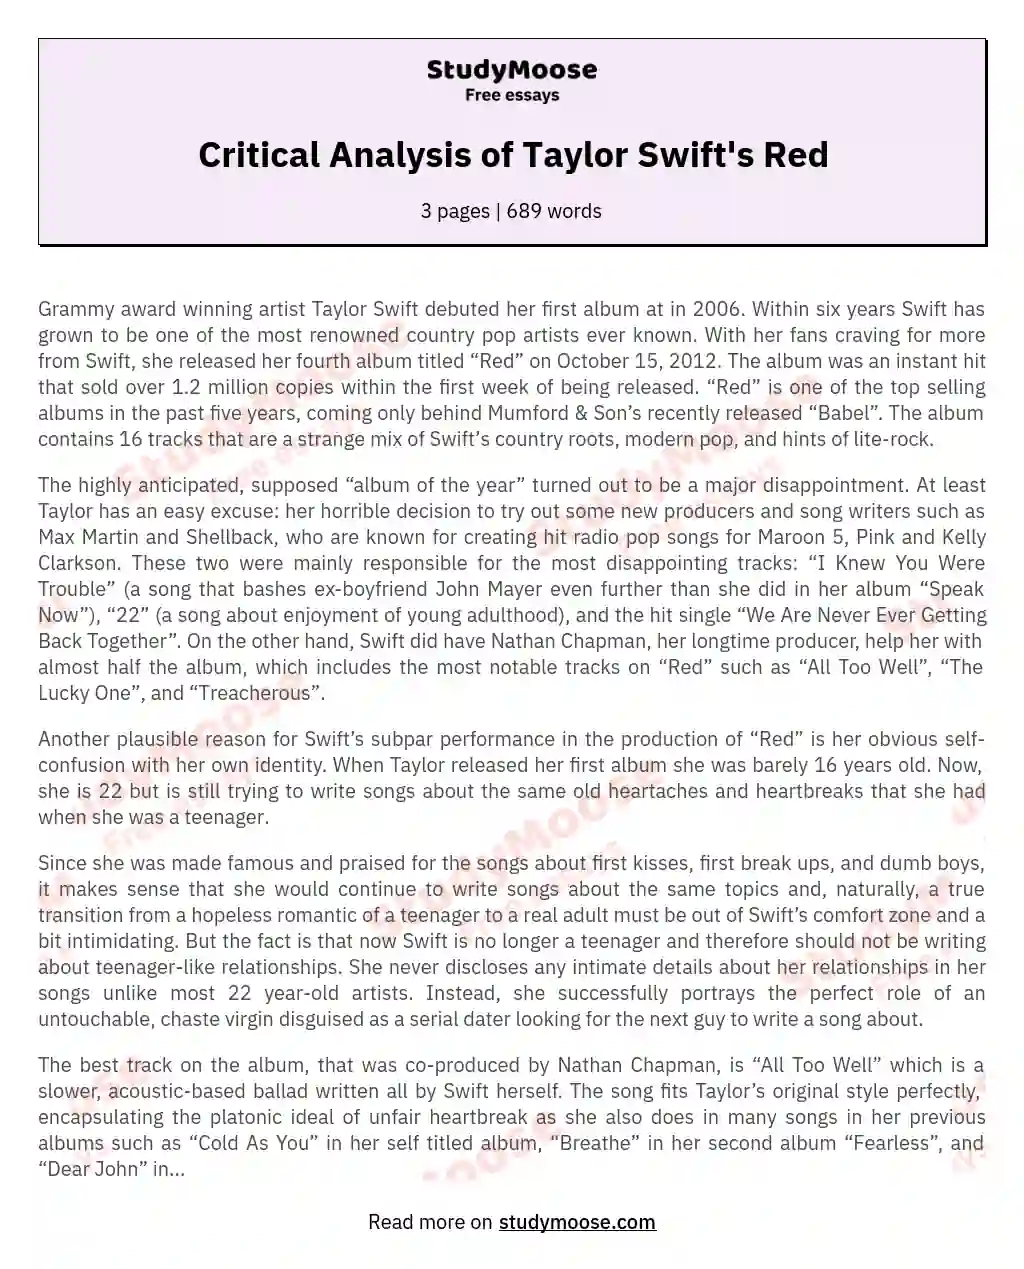 Critical Analysis of Taylor Swift's Red essay